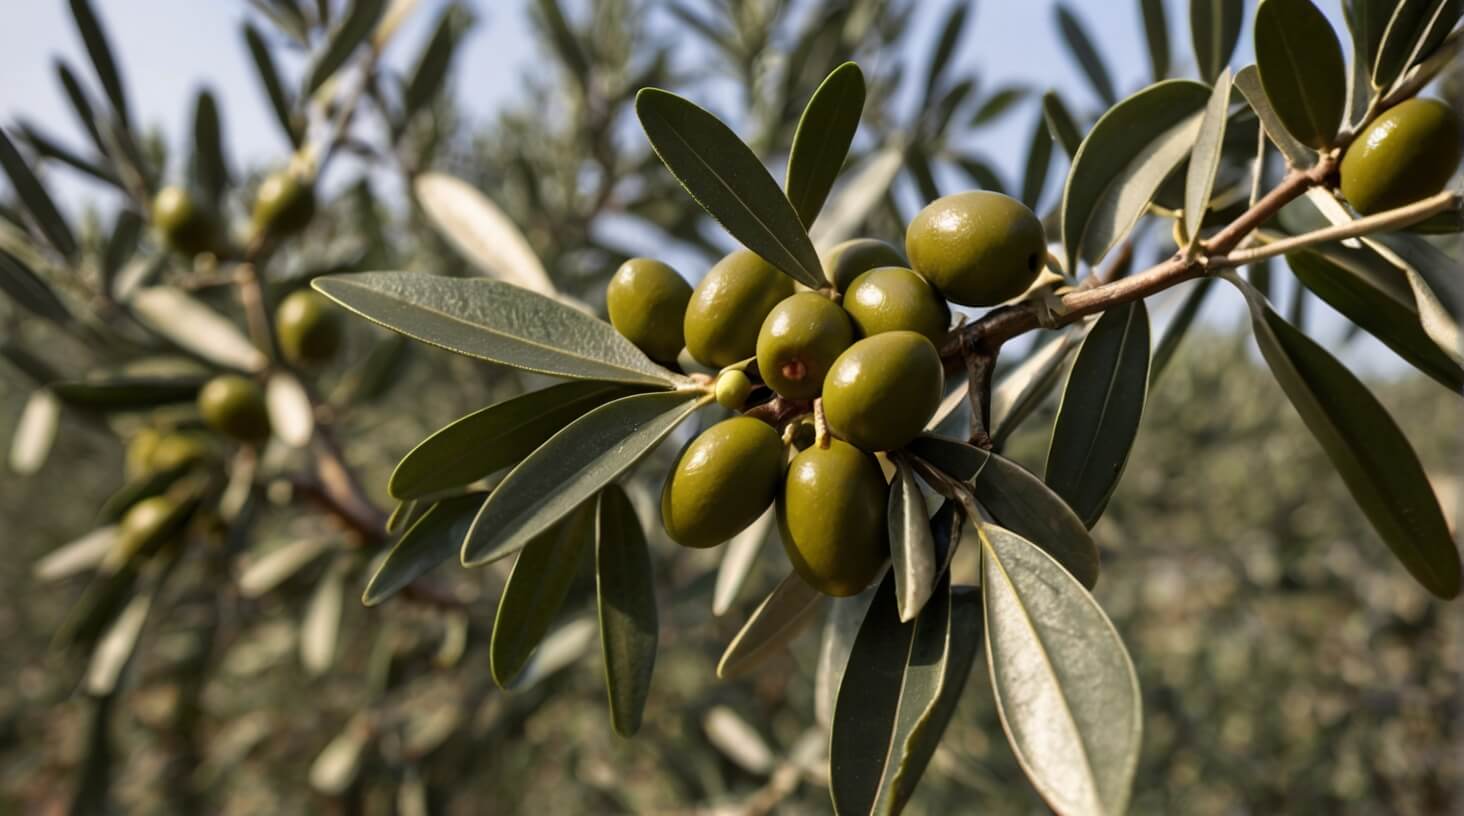 A bottle of olive leaf extract surrounded by fresh olives and leaves, symbolizing the history and benefits of olive leaf extract.